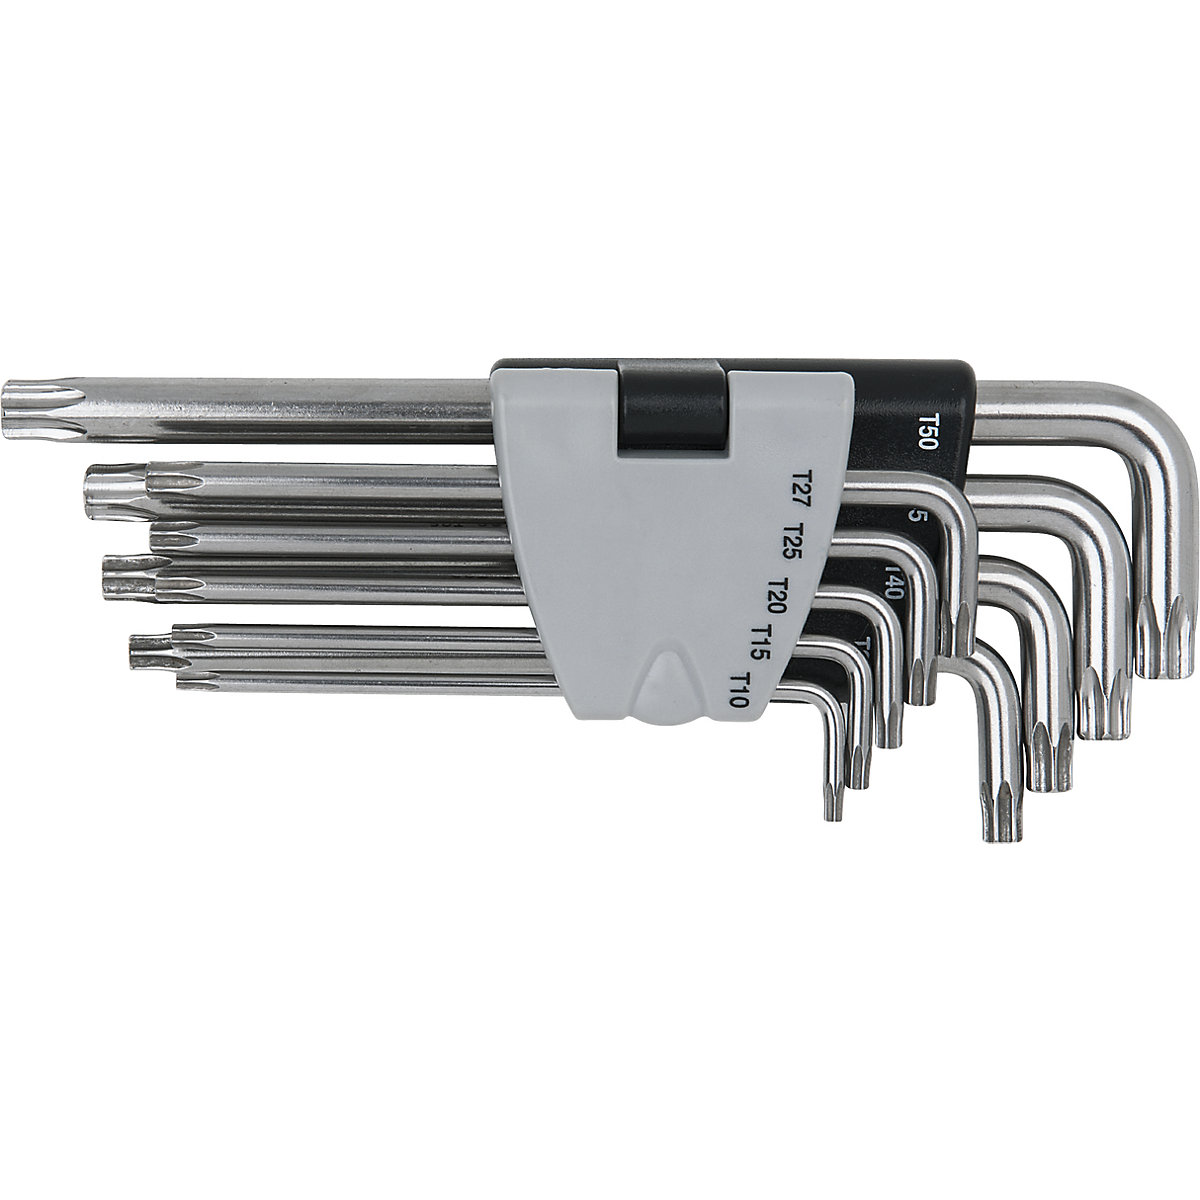 Stainless steel angle key wrench set, long - KS Tools